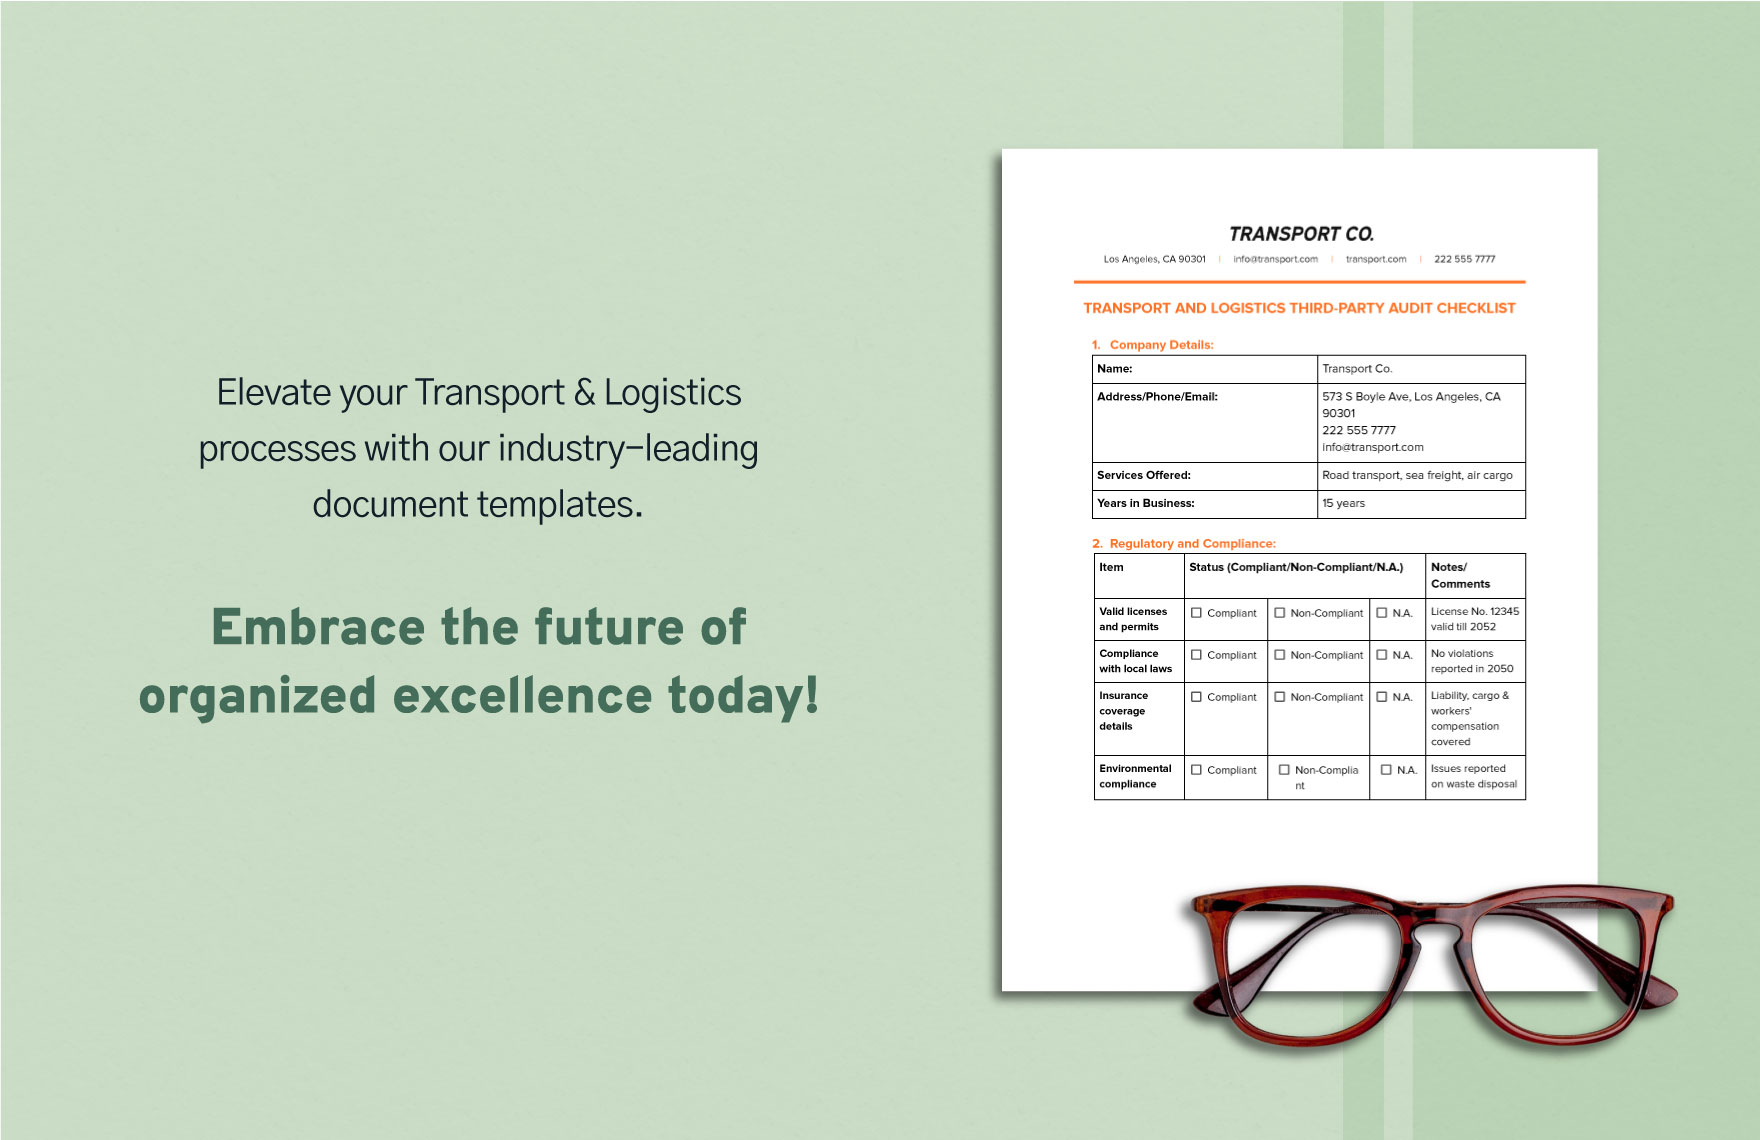 Transport and Logistics Notice of Force Majeure Template